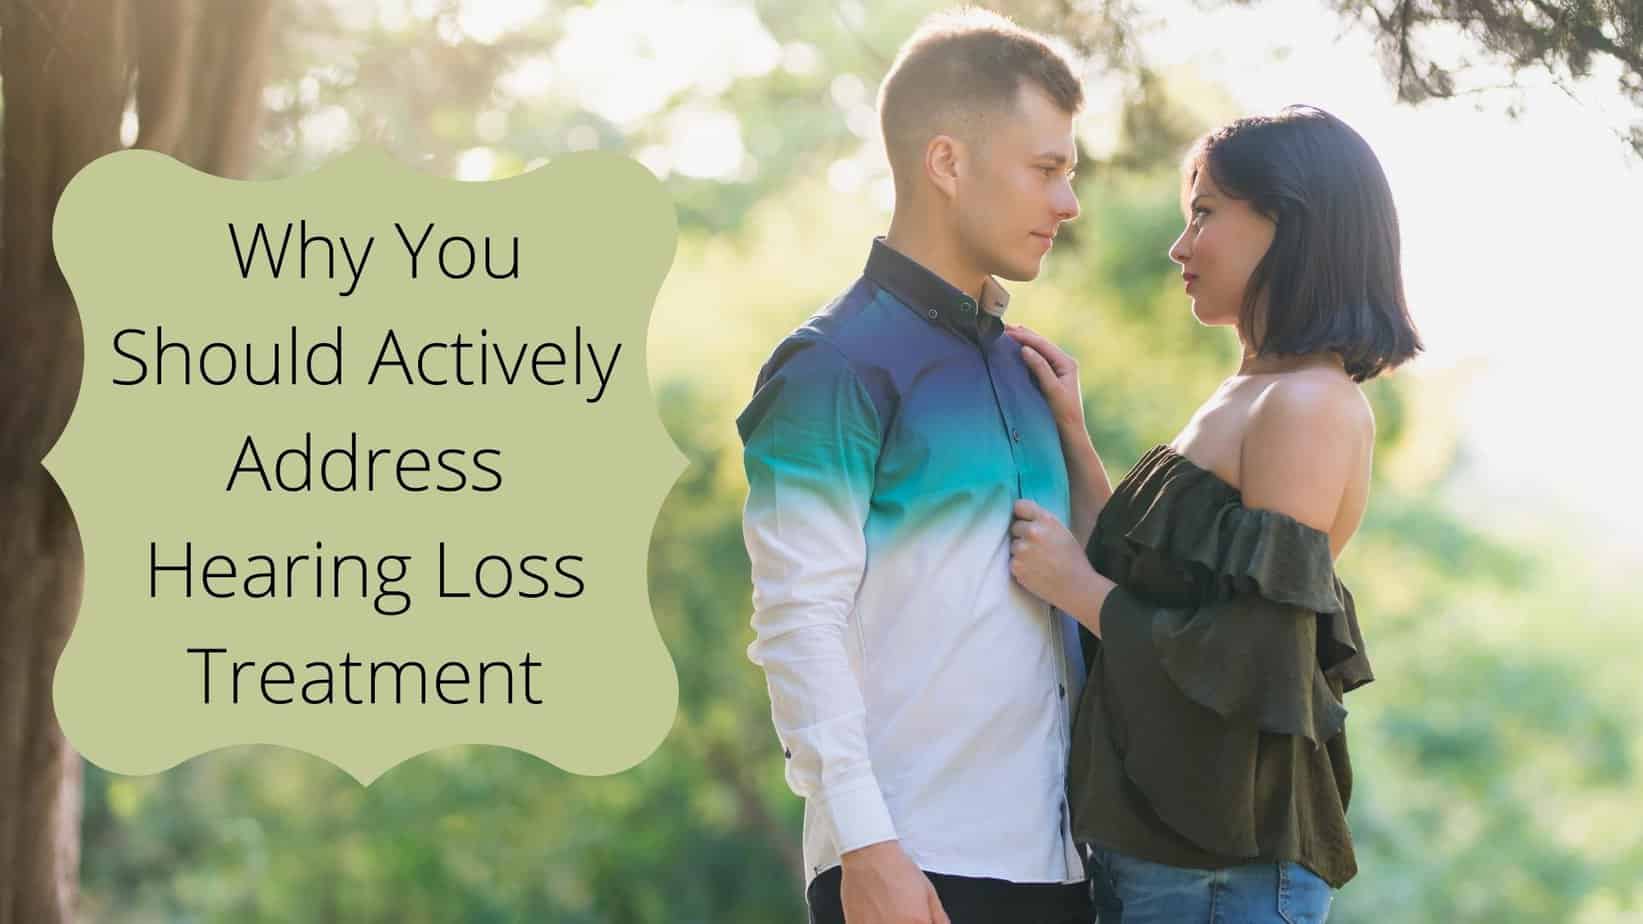 Why You Should Actively Address Hearing Loss Treatment